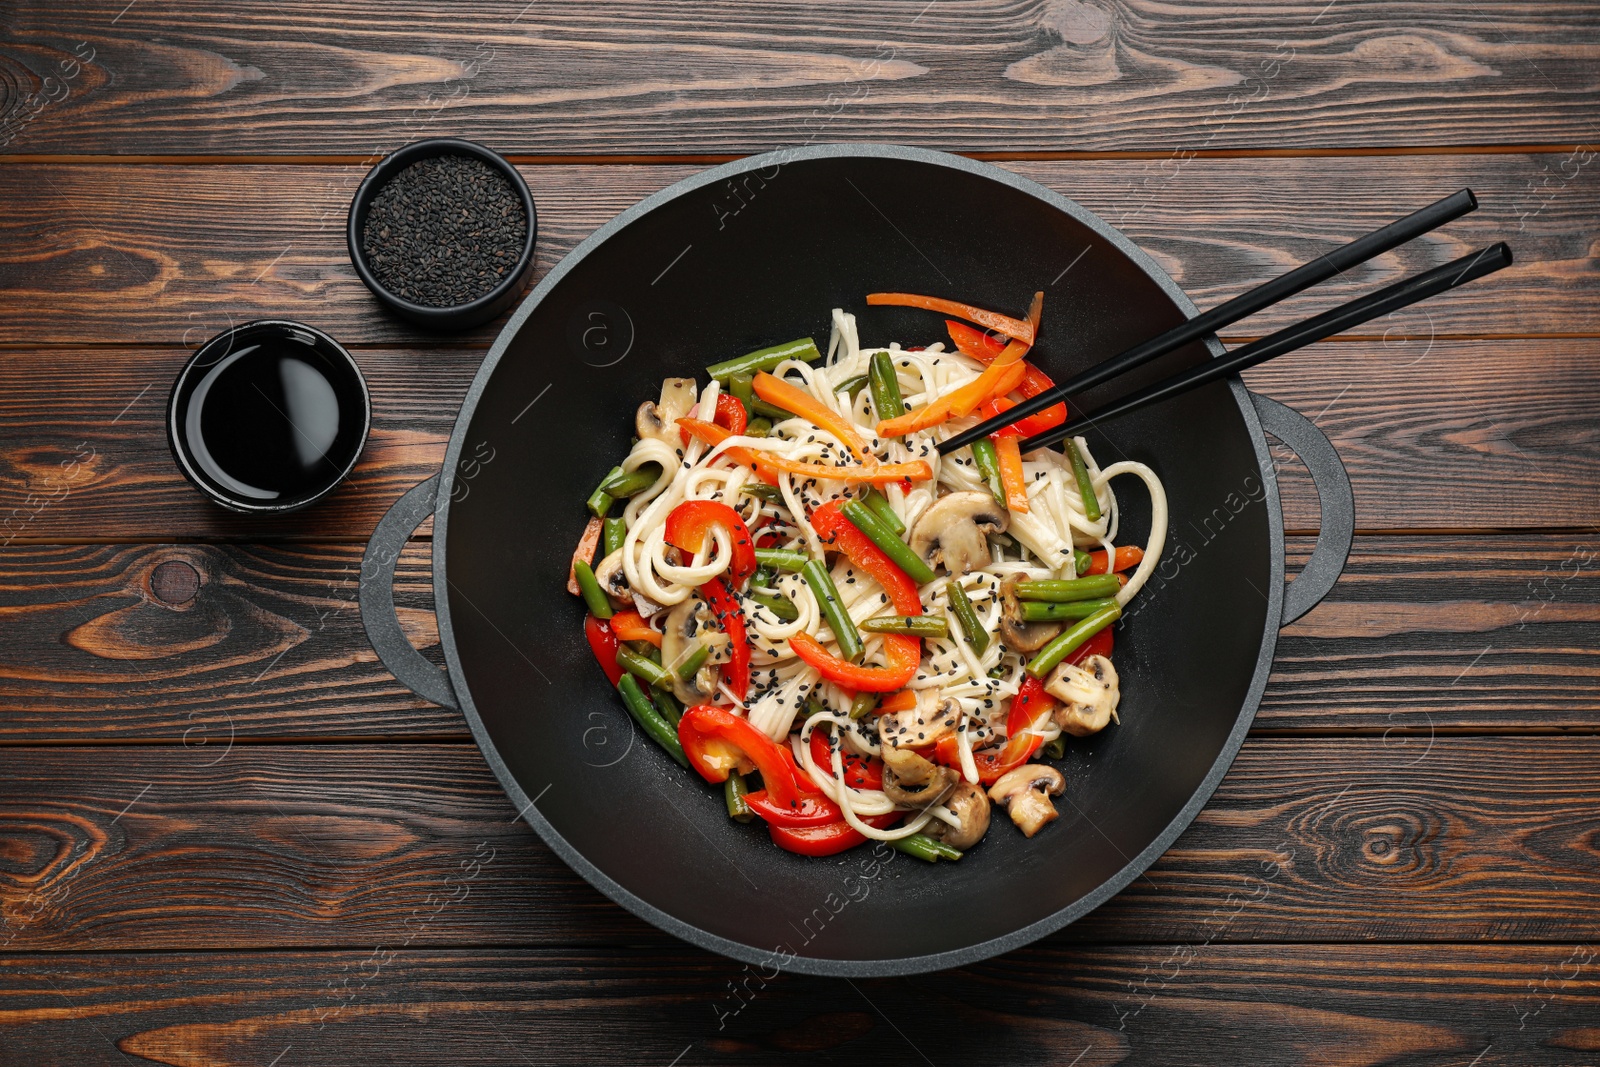 Photo of Stir fried noodles with mushrooms and vegetables in wok on wooden table, flat lay